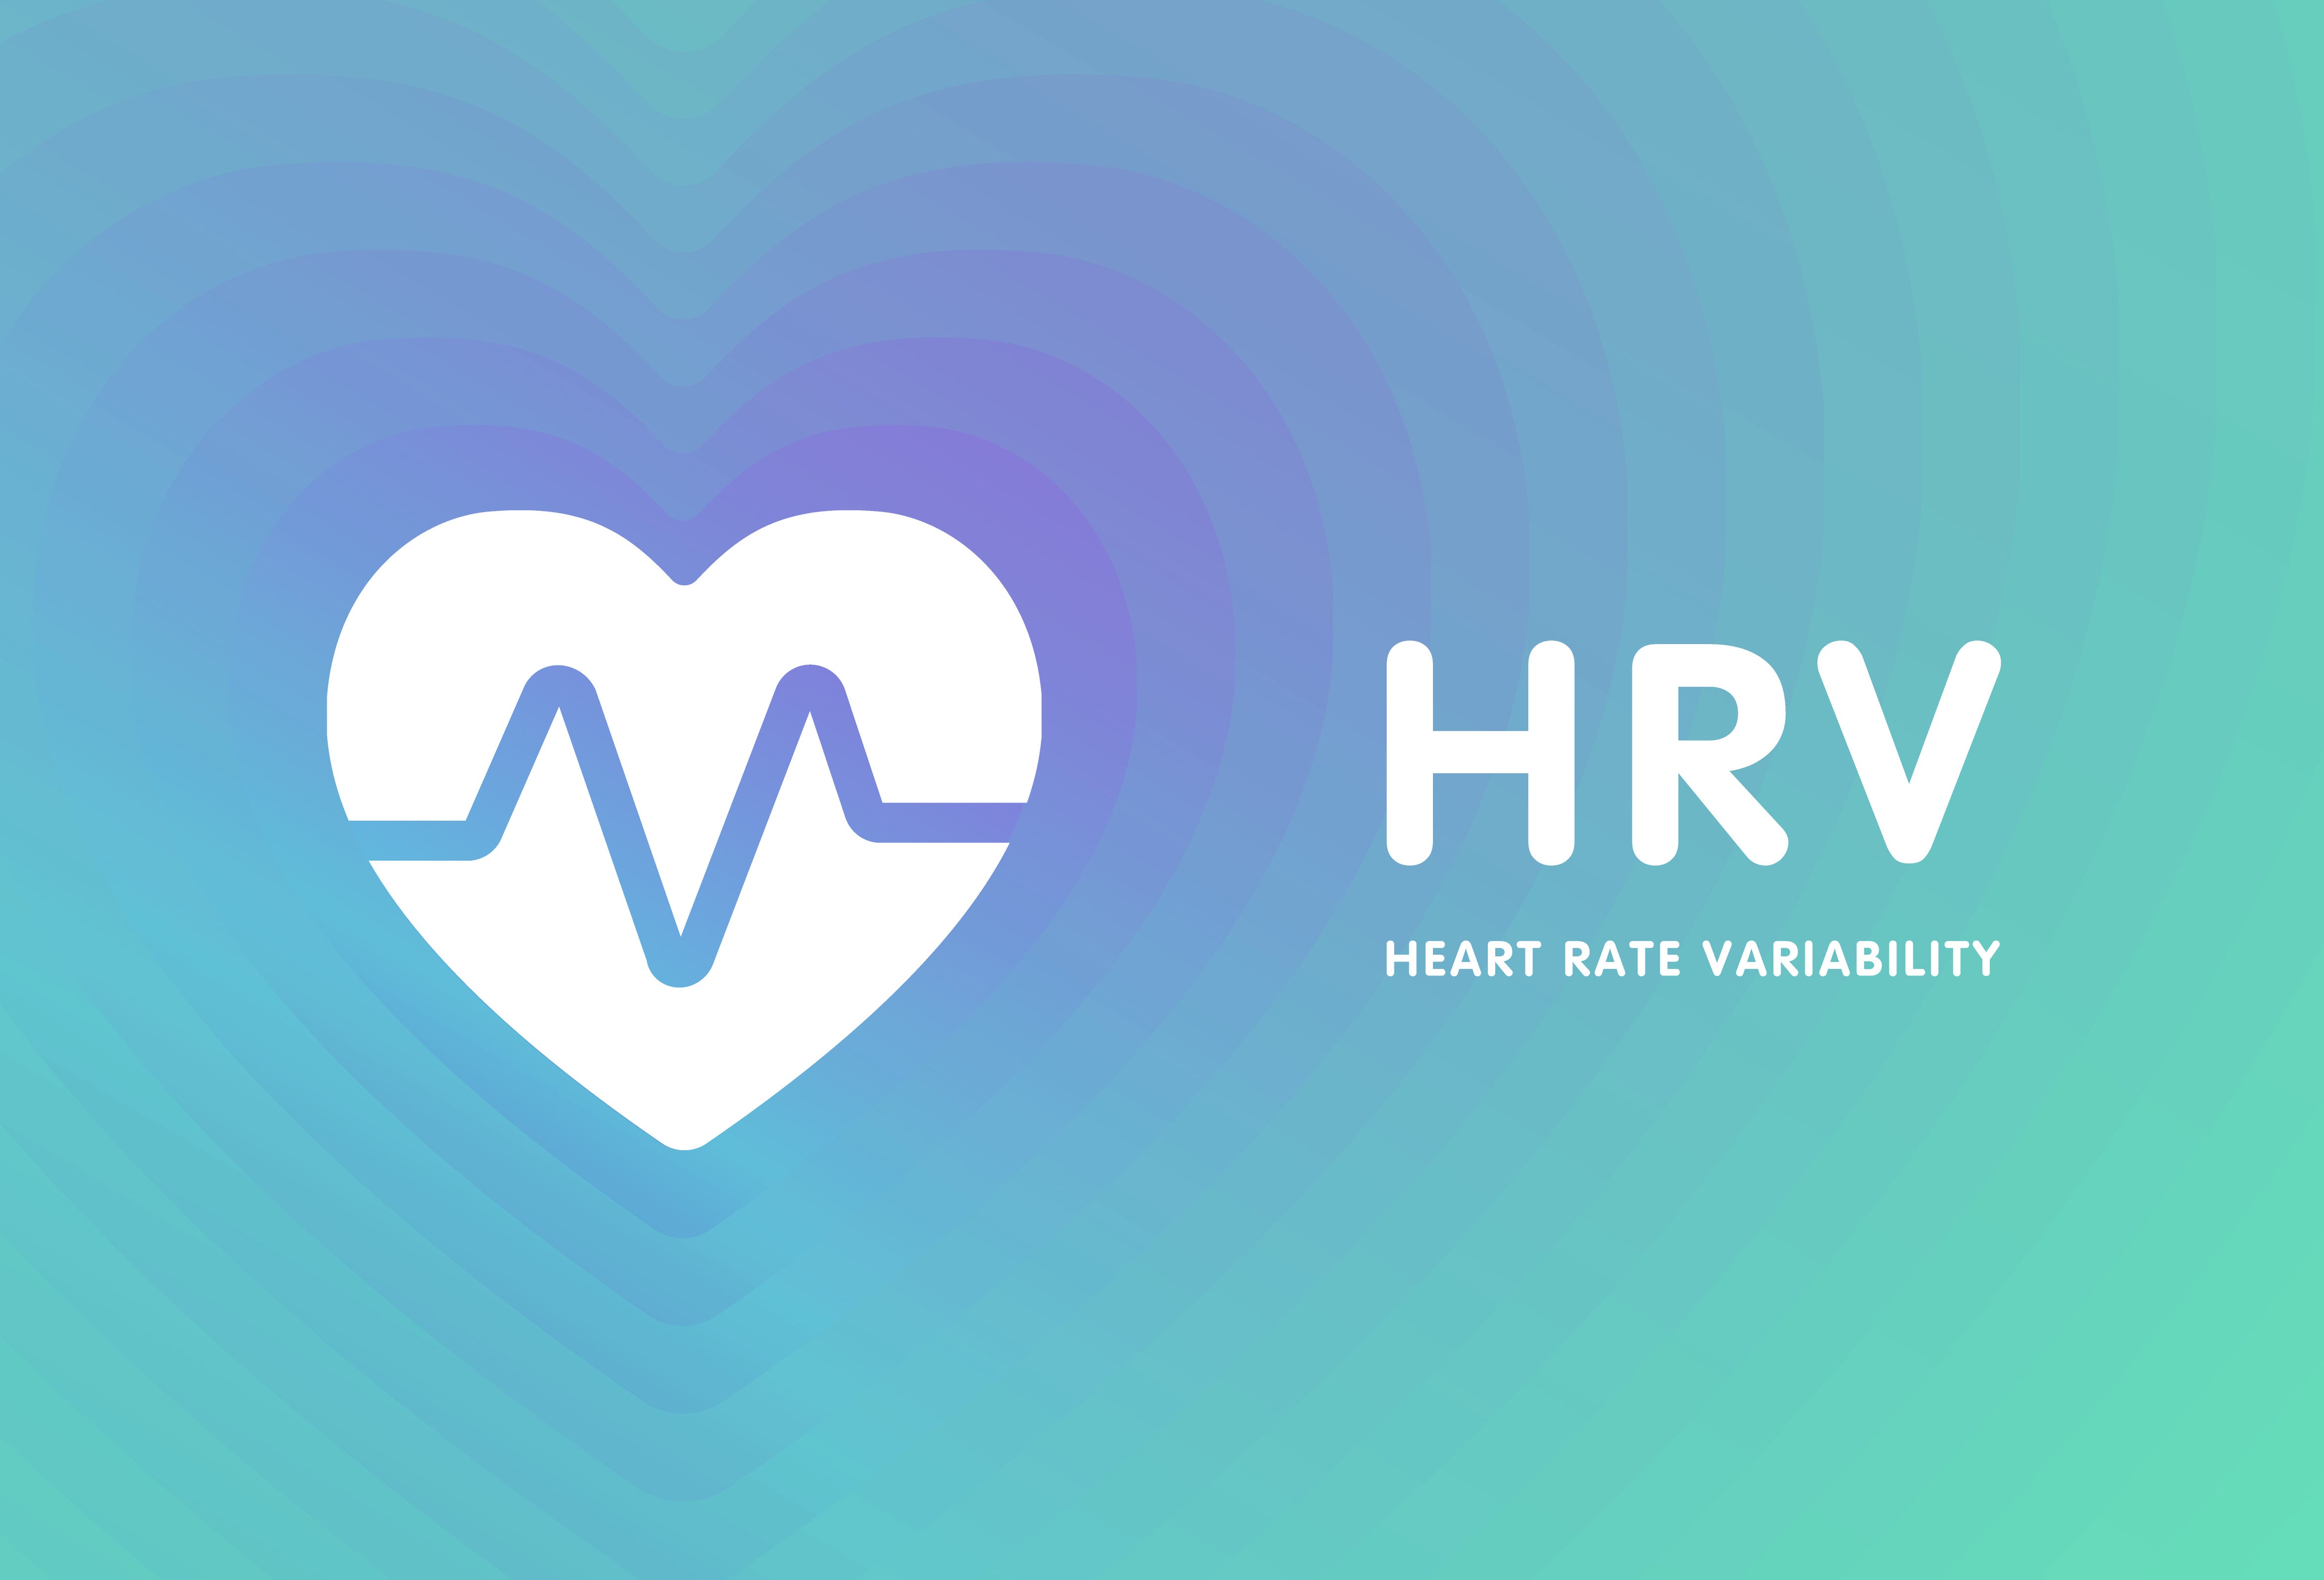 Heart Rate Variability